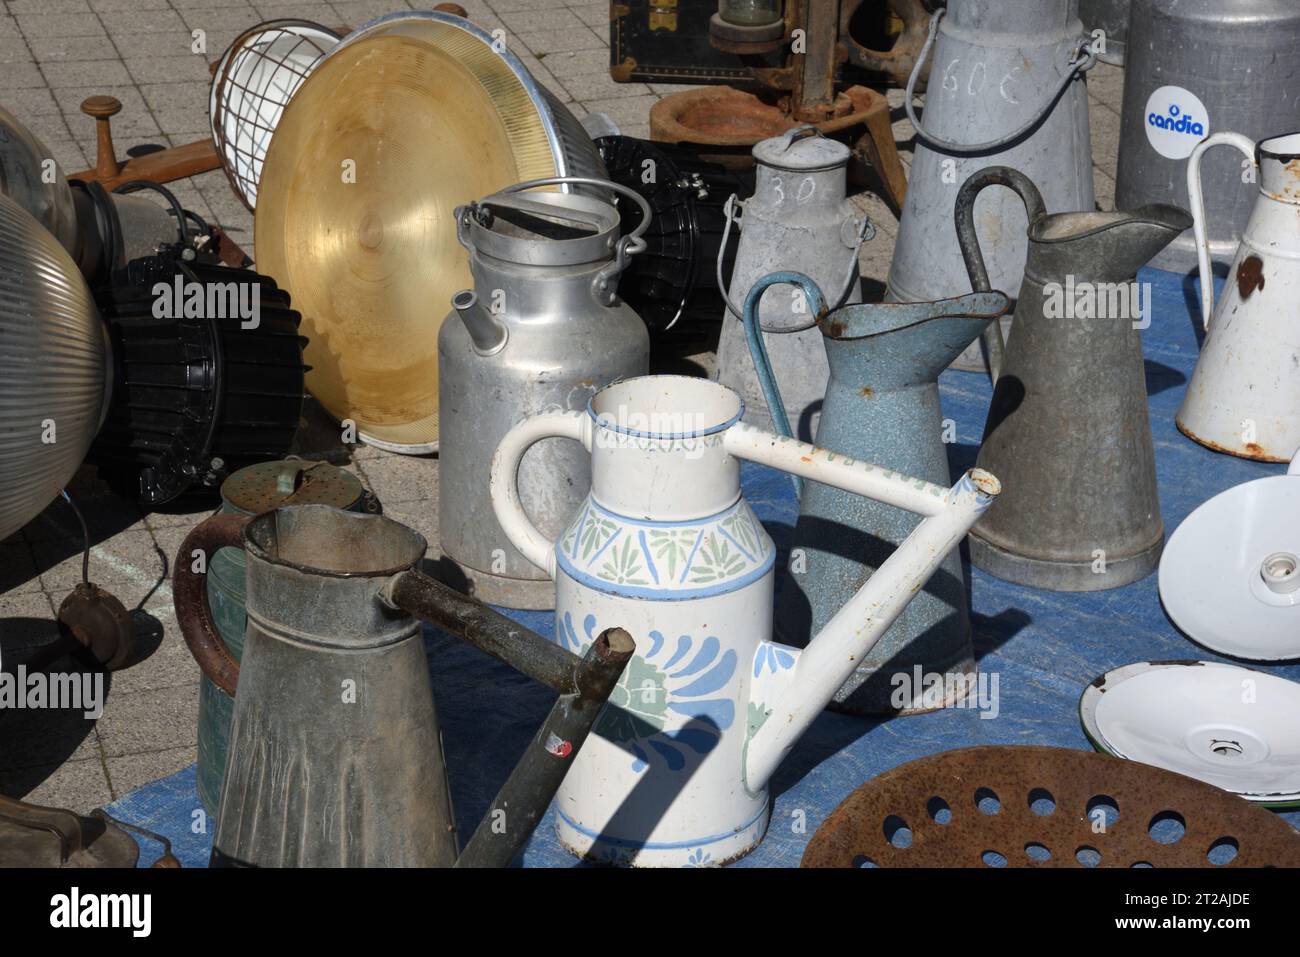 Vintage, Collectable or Collectible Watering Cans and Milk Churns on Market Stall, Antiquities Market or Brocante Provence France Stock Photo